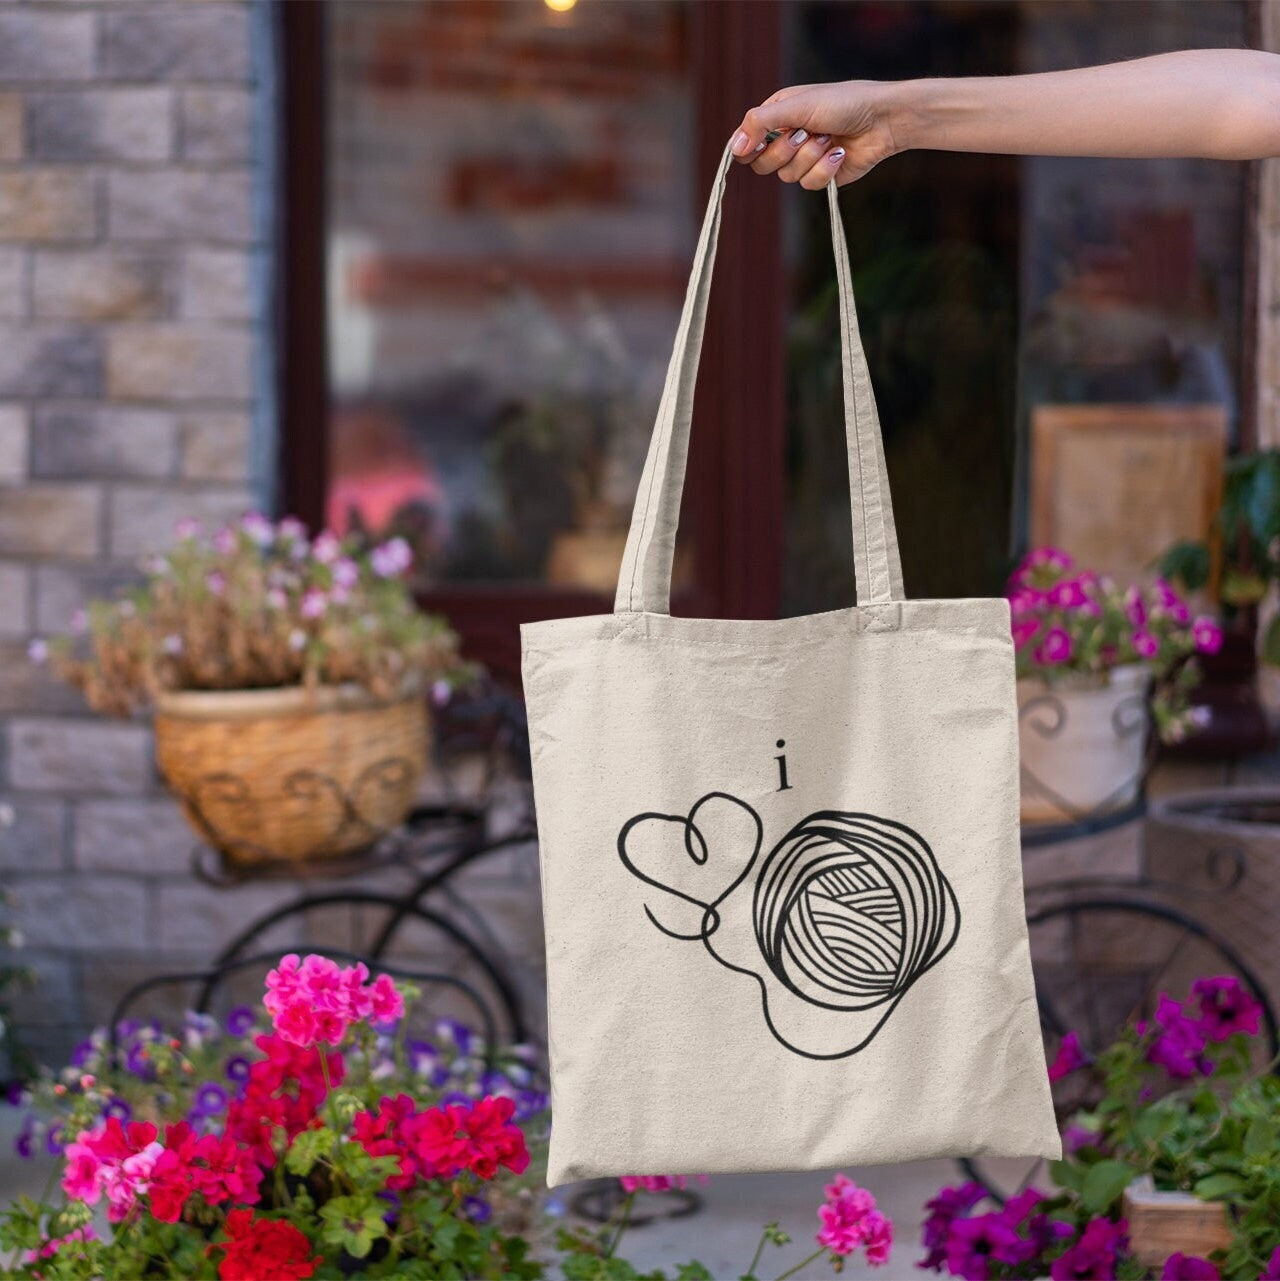 Craft Project Bag • "I Heart Yarn" Tote • Cotton Canvas Yarn Bag • Gift For Knitter or Crocheter